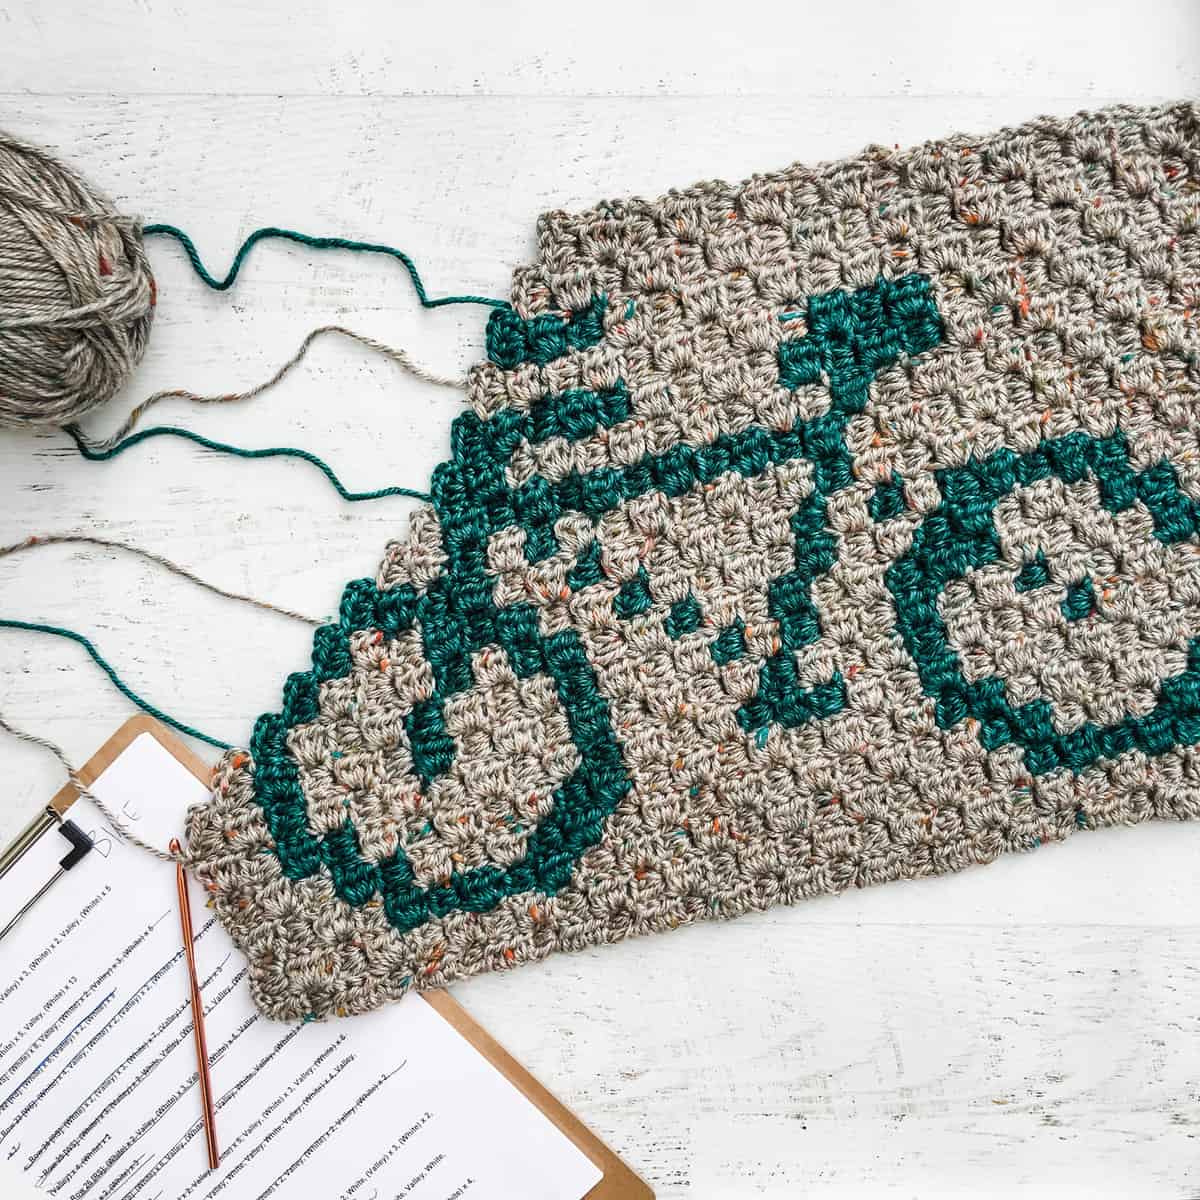 Flat lay of a gray with a green bike pattern C2C blanket, hook, a checklist on the bottom, and a gray yarn on the left side.